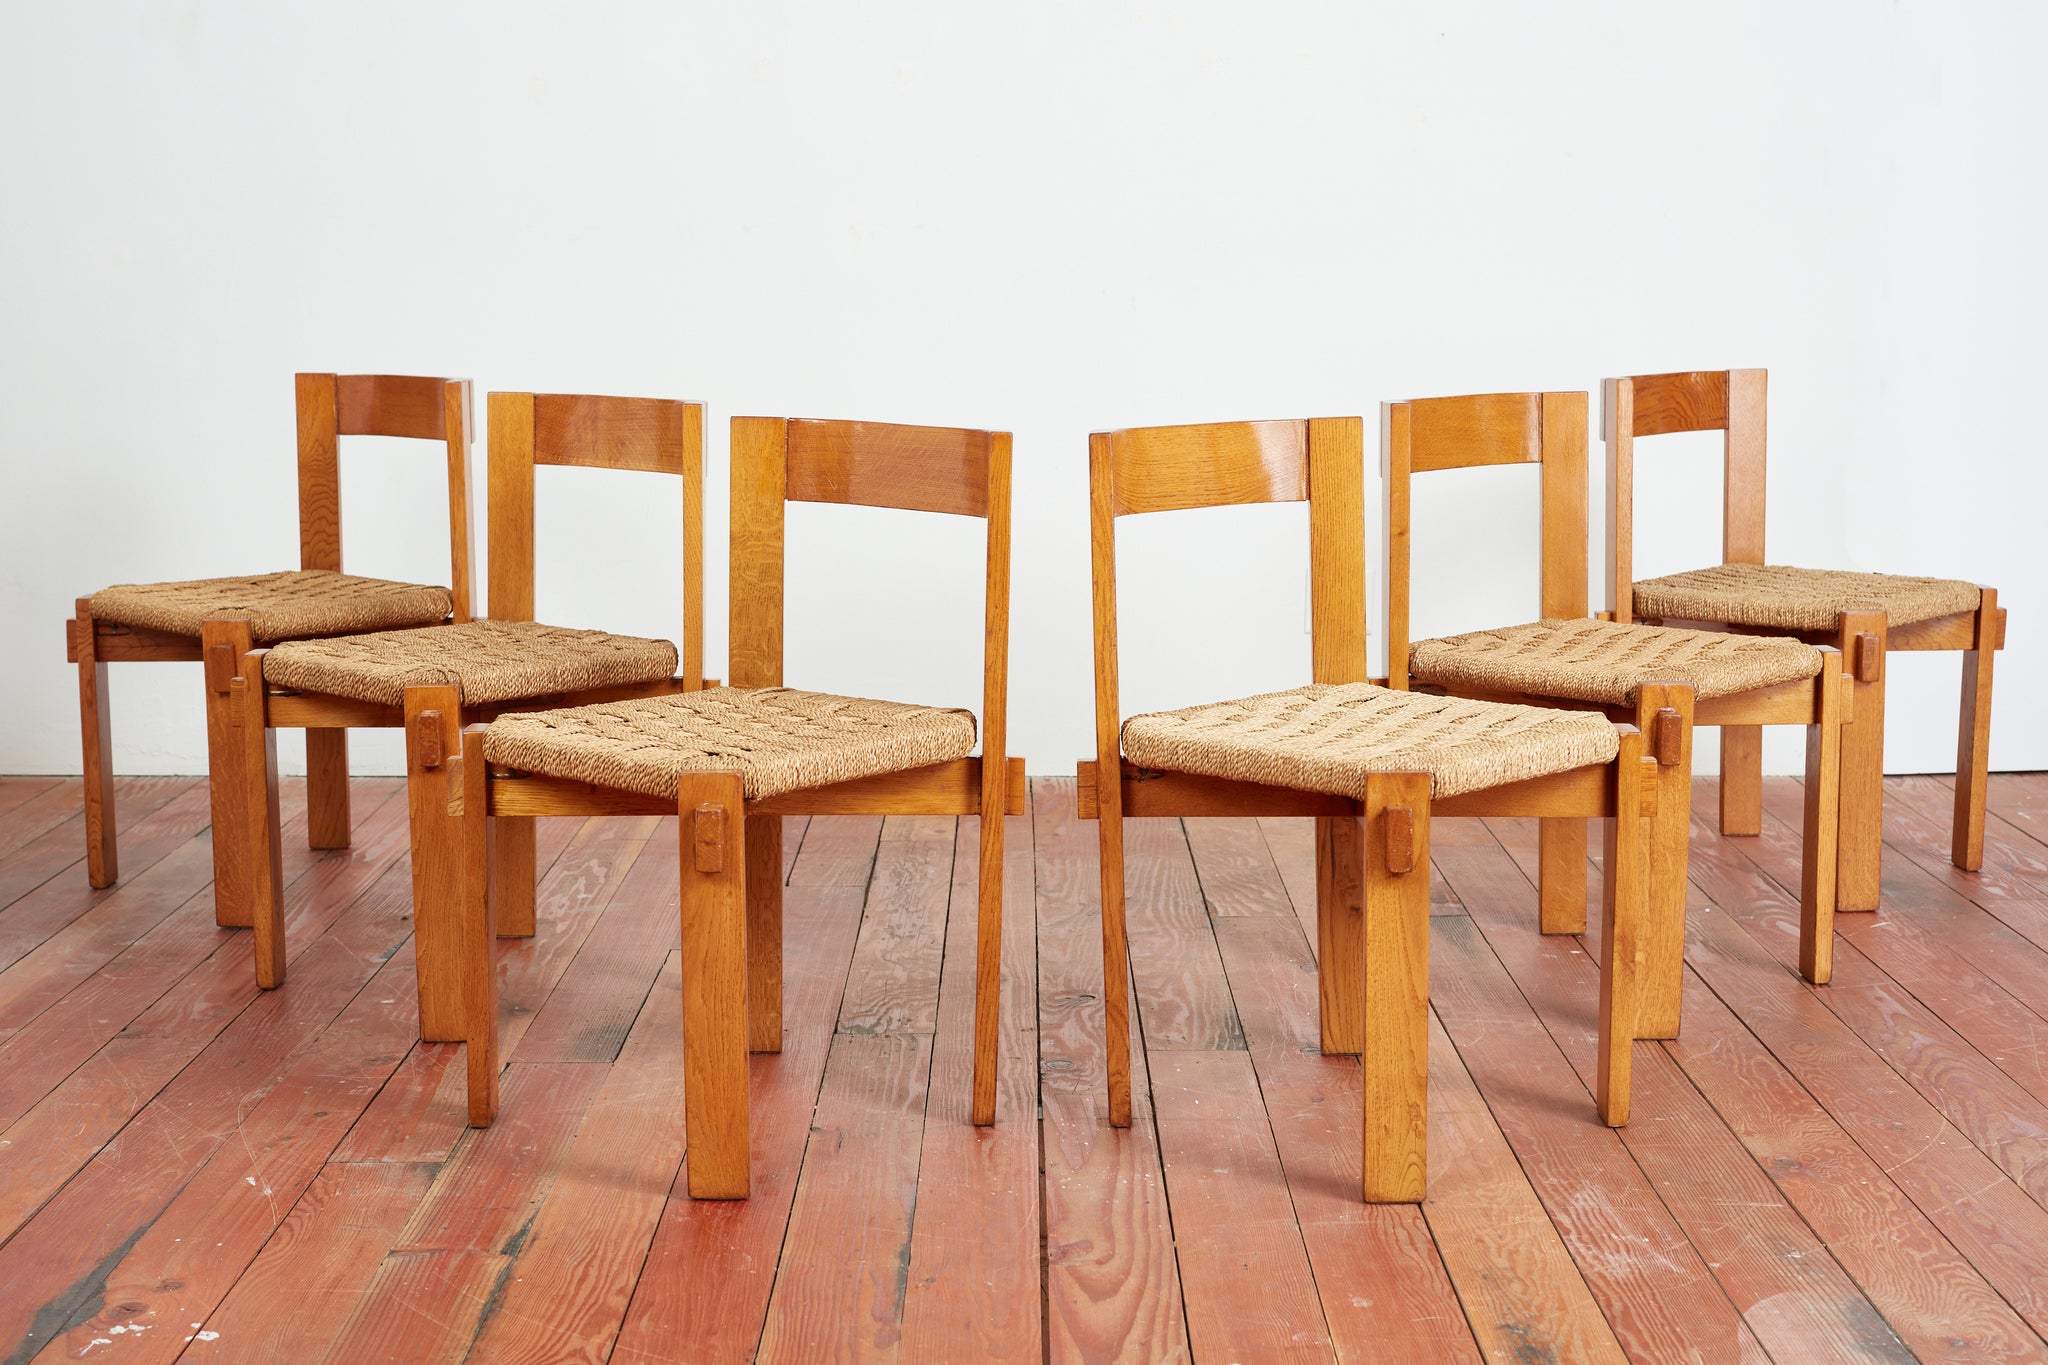 Charlotte Perriand, PAIR OF CHAIRS, MODEL NO. 19